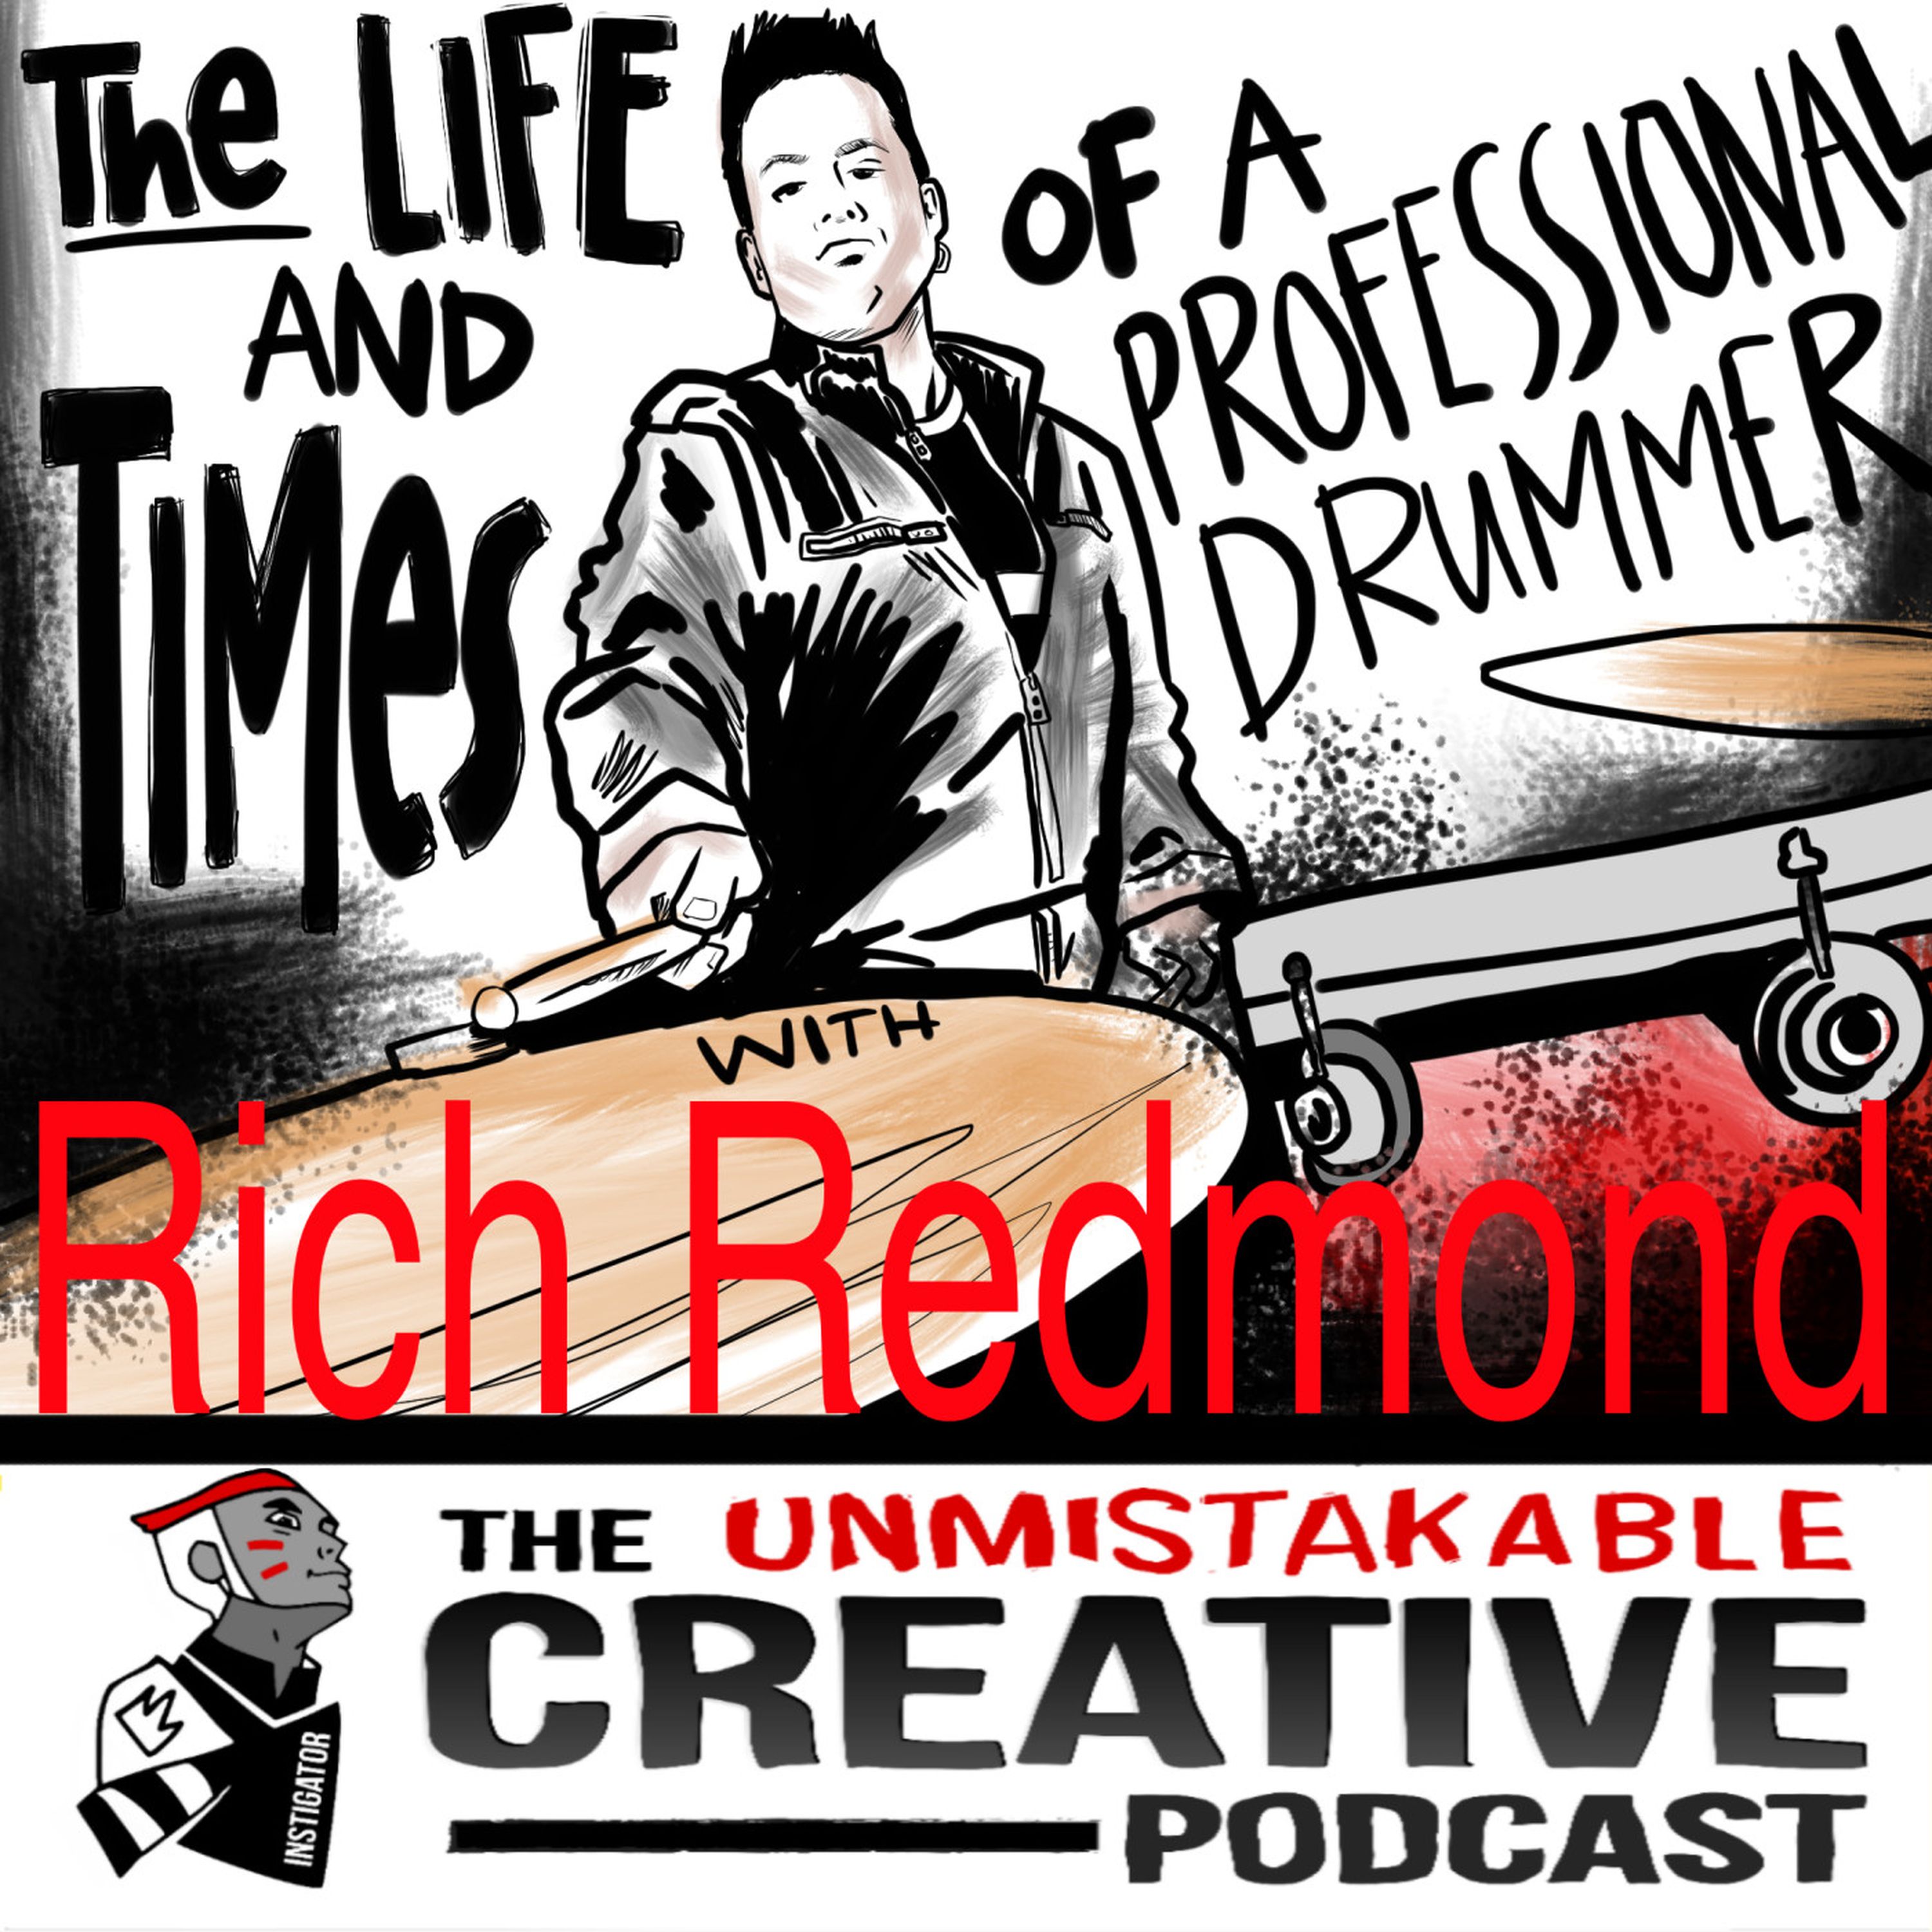 The Life and Times of a Professional Drummer with Rich Redmond